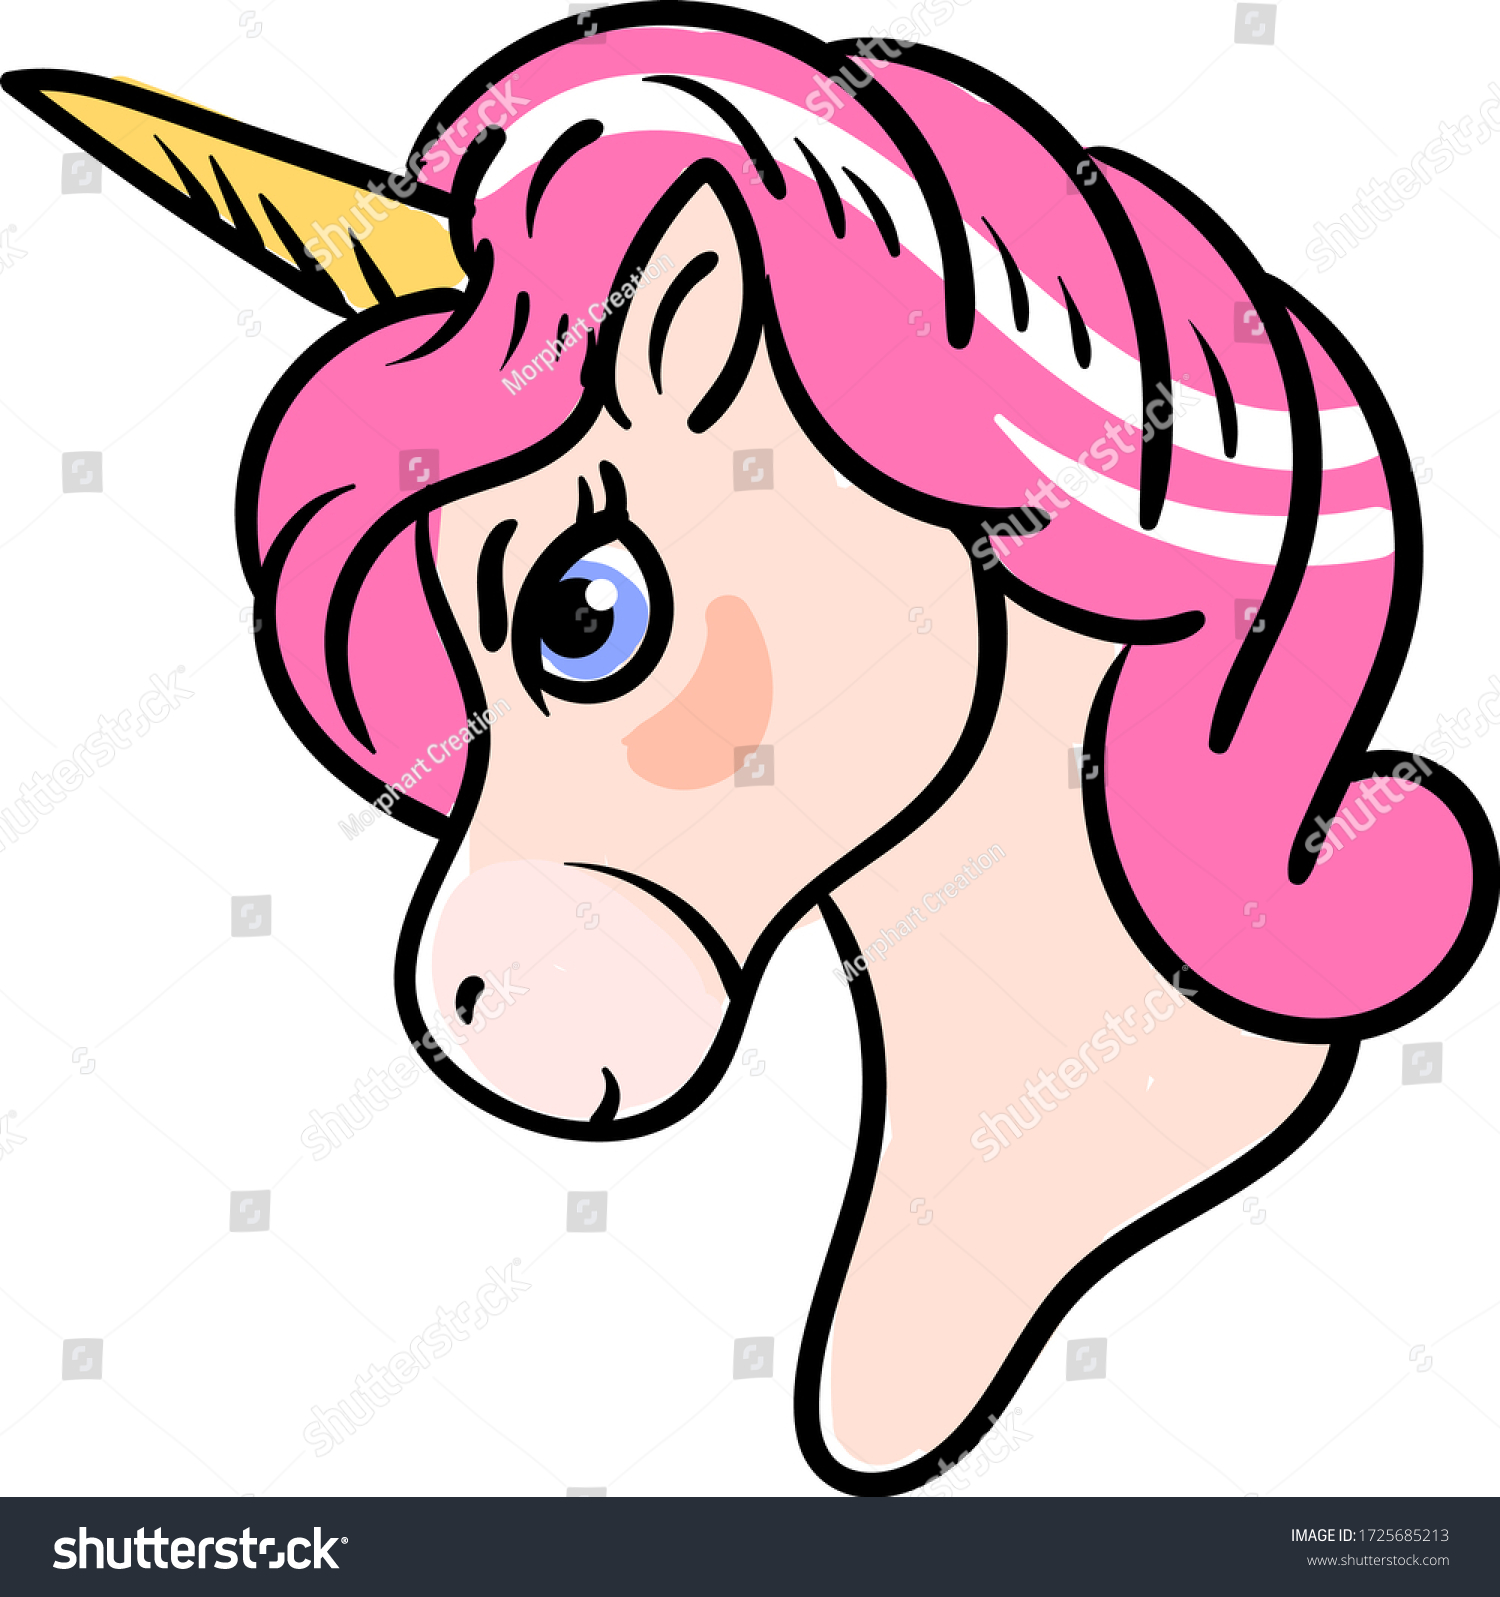 SVG of Angry unicorn illustration, vector on white background svg